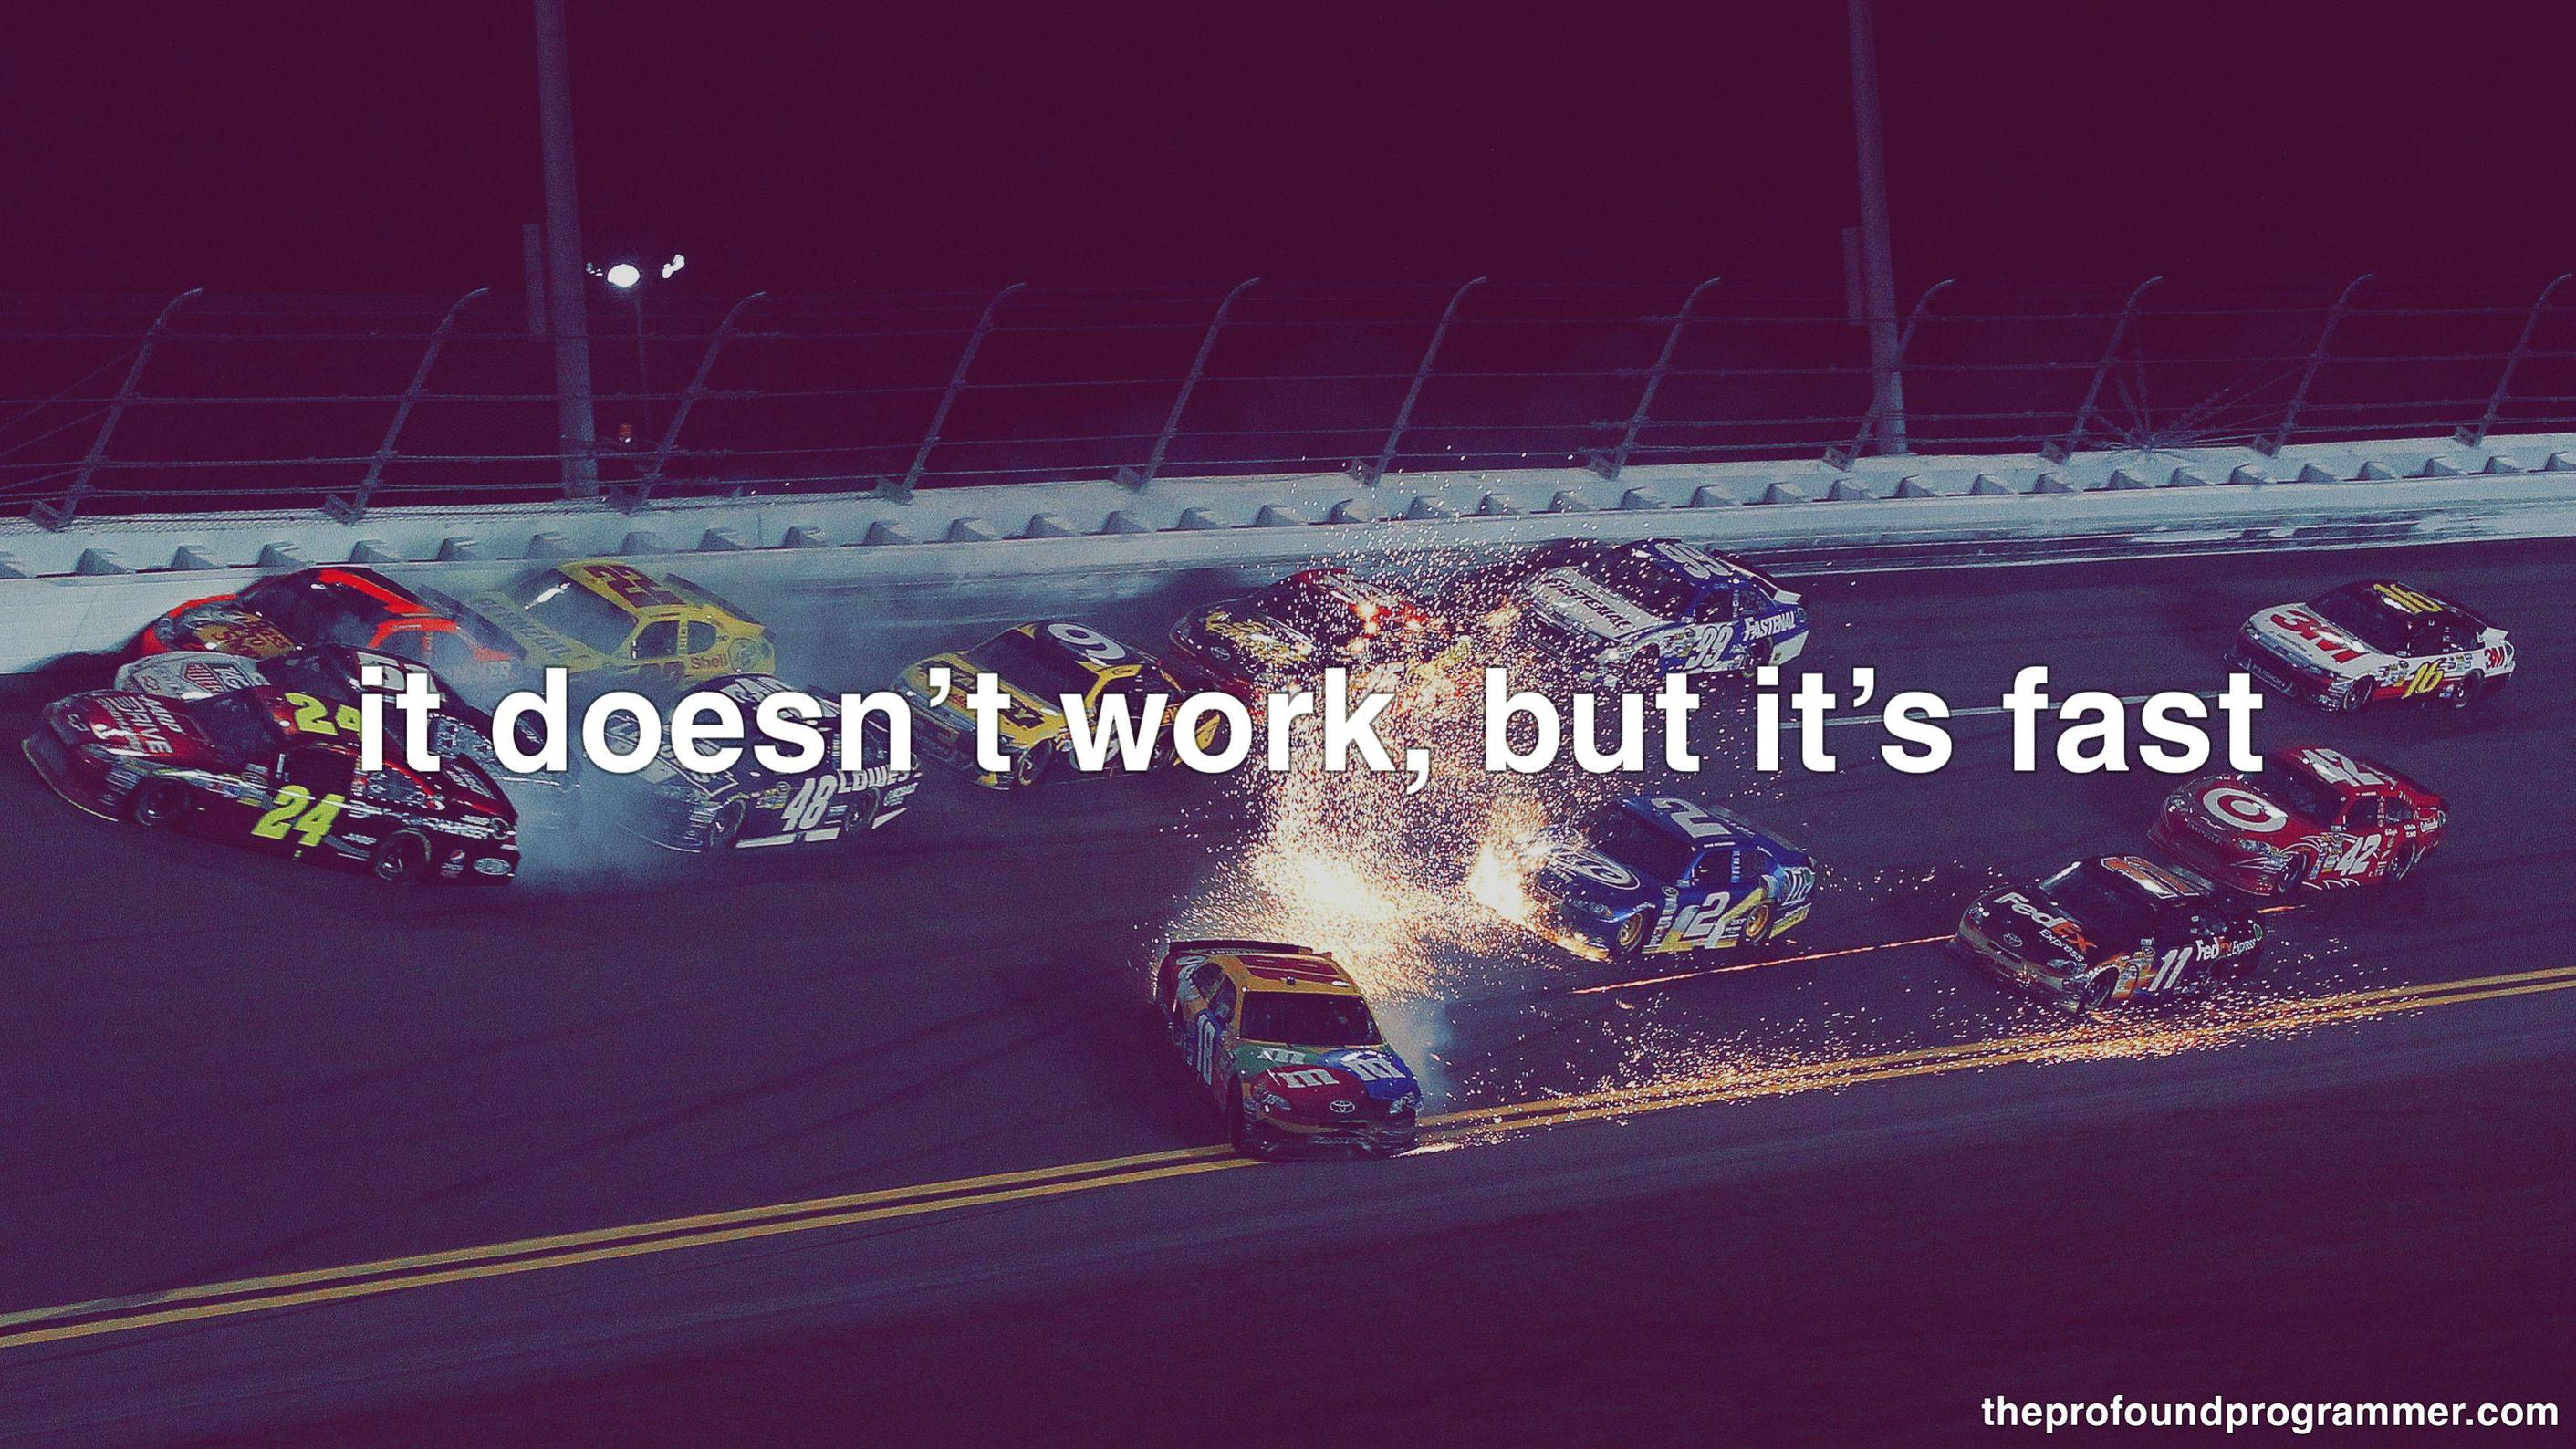 an image of a NASCAR crash with
the text 'it doesnt work, but it's fast' superimposed, courtesy of
theprofoundprogrammer.com